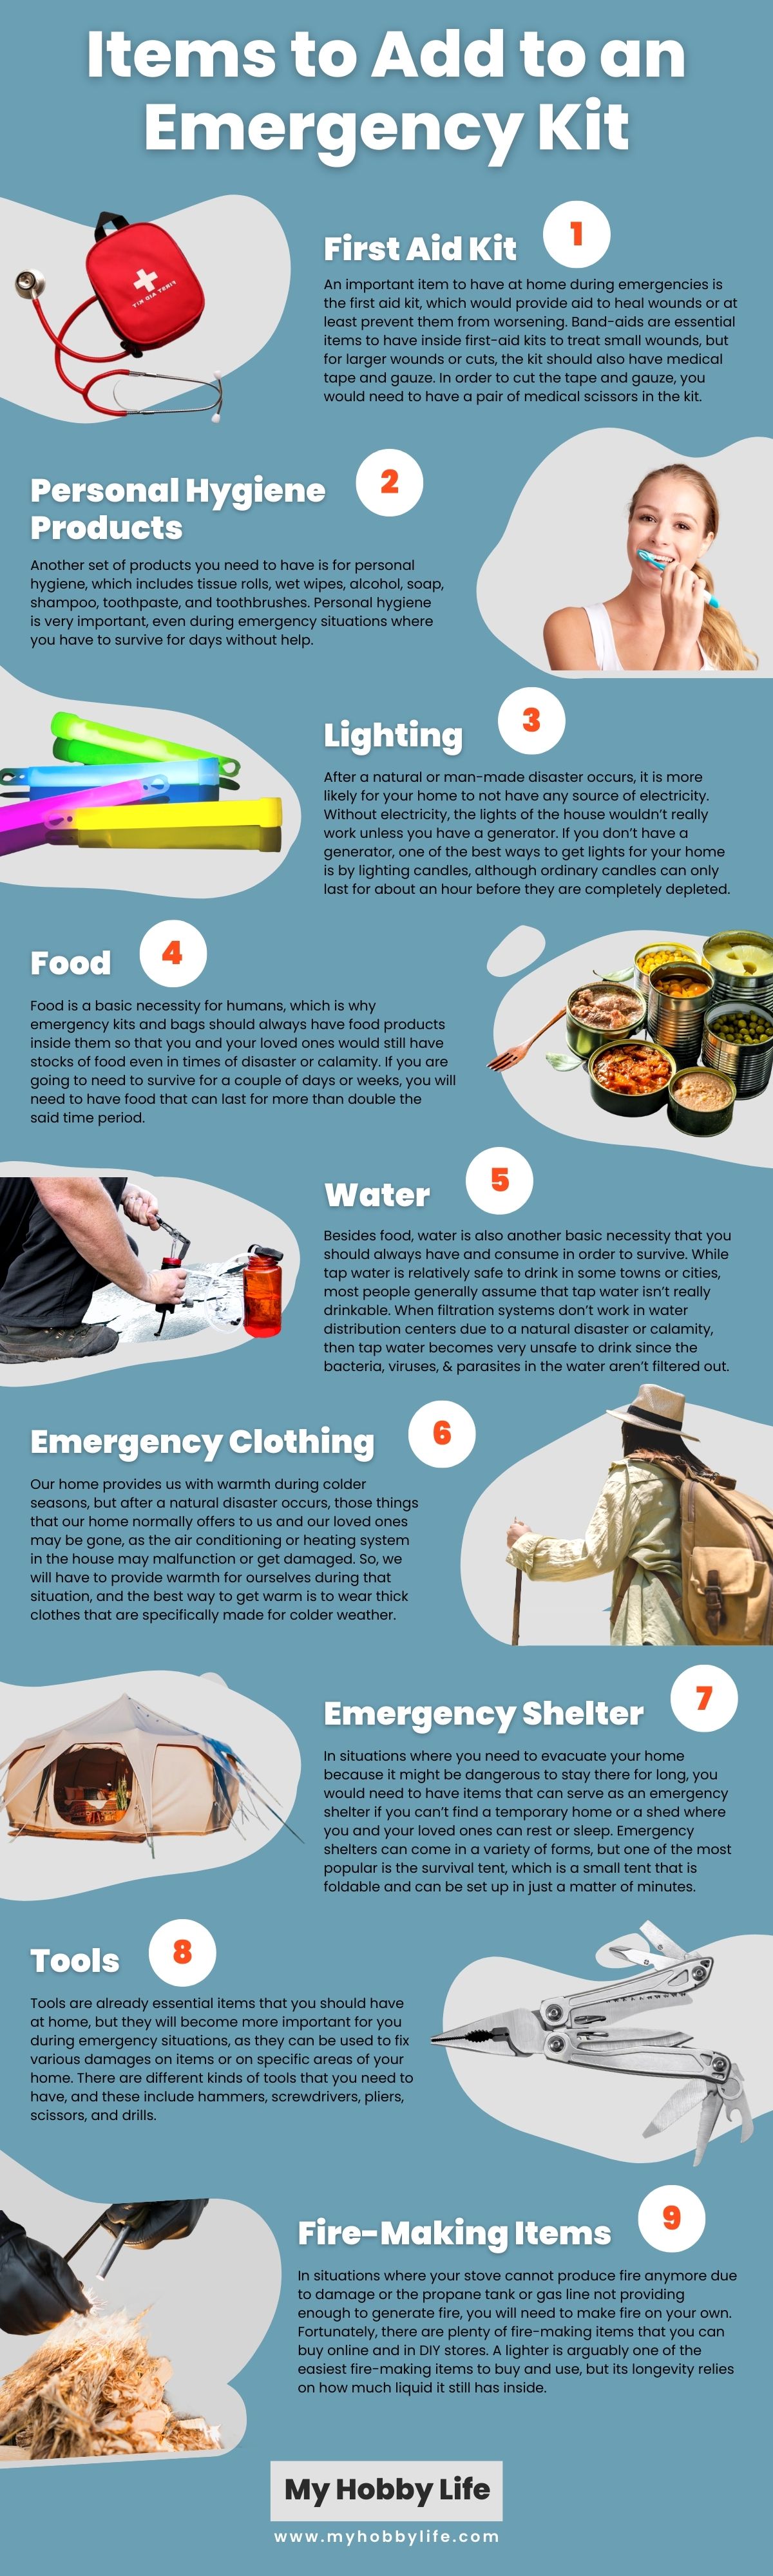 Items to Add to an Emergency Kit